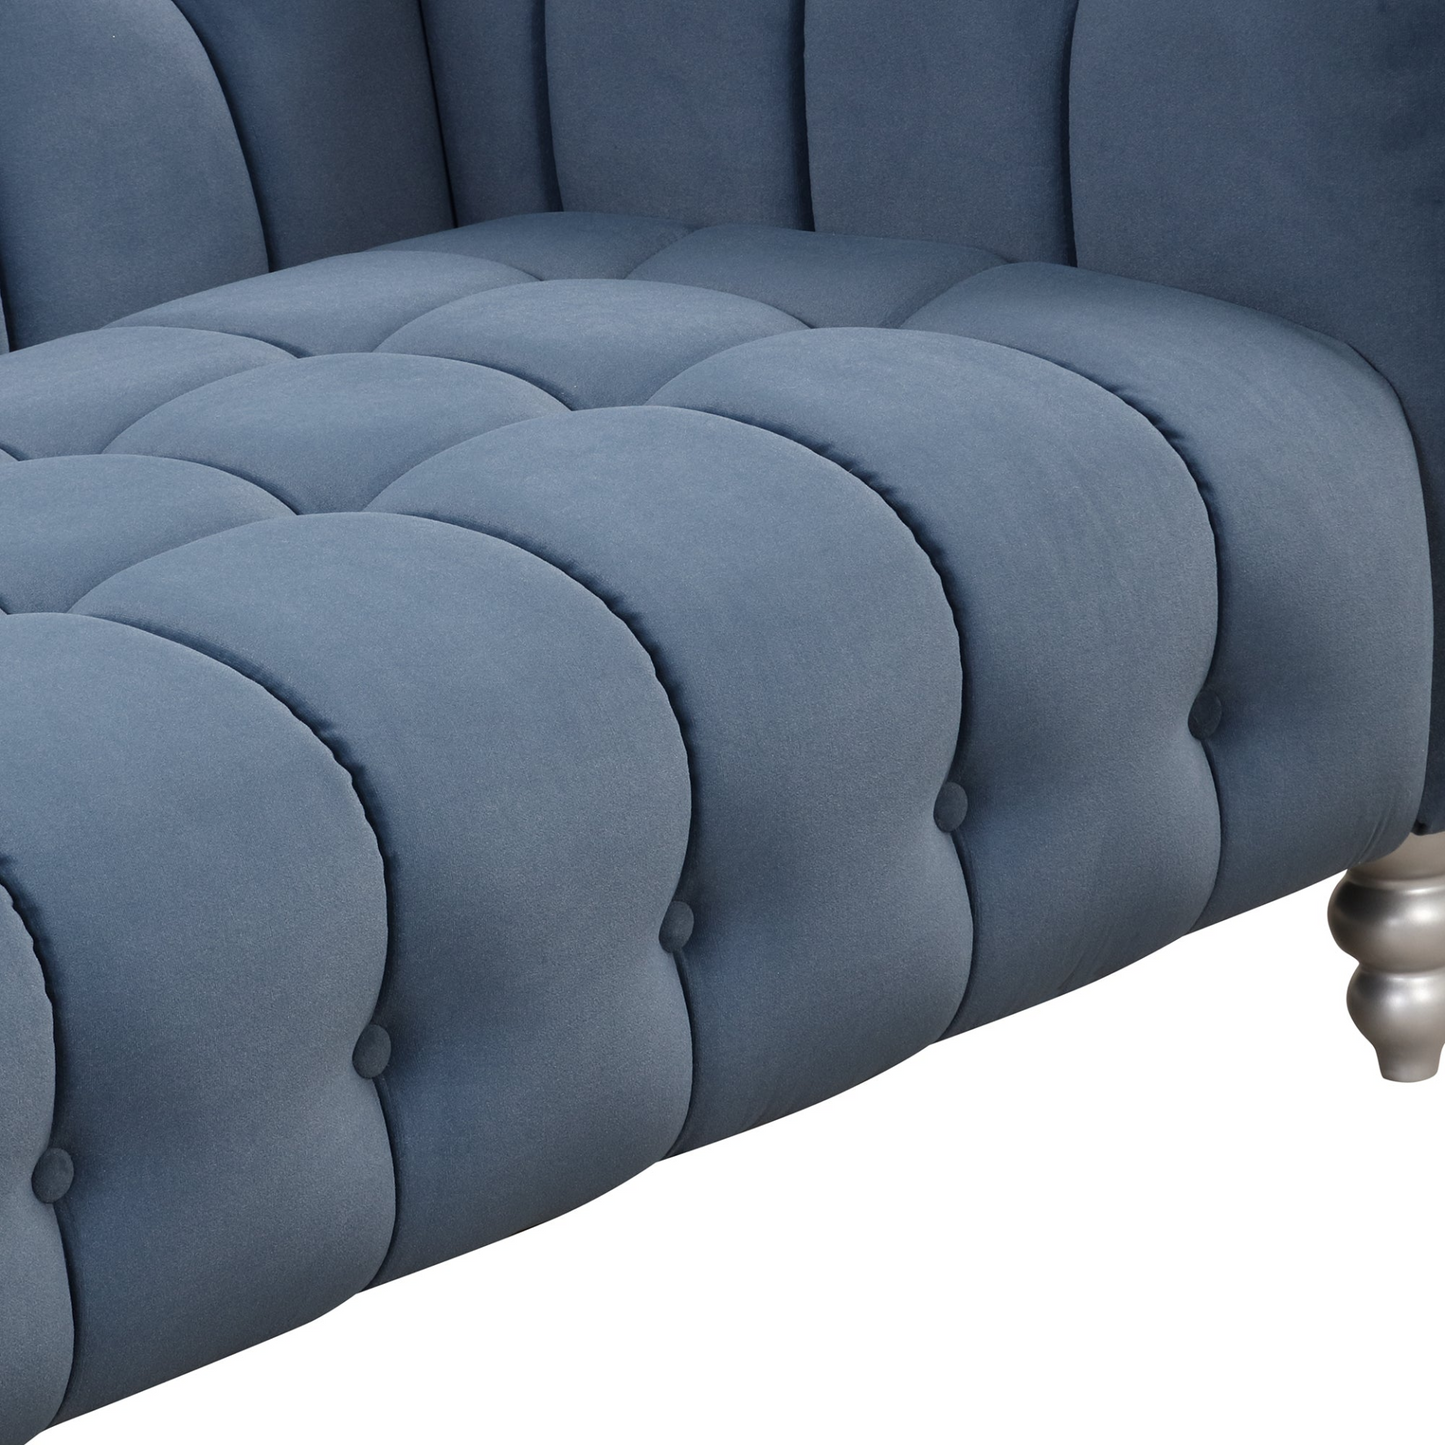 89" Modern Sofa Dutch Fluff Upholstered sofa with solid wood legs, buttoned tufted backrest,blue